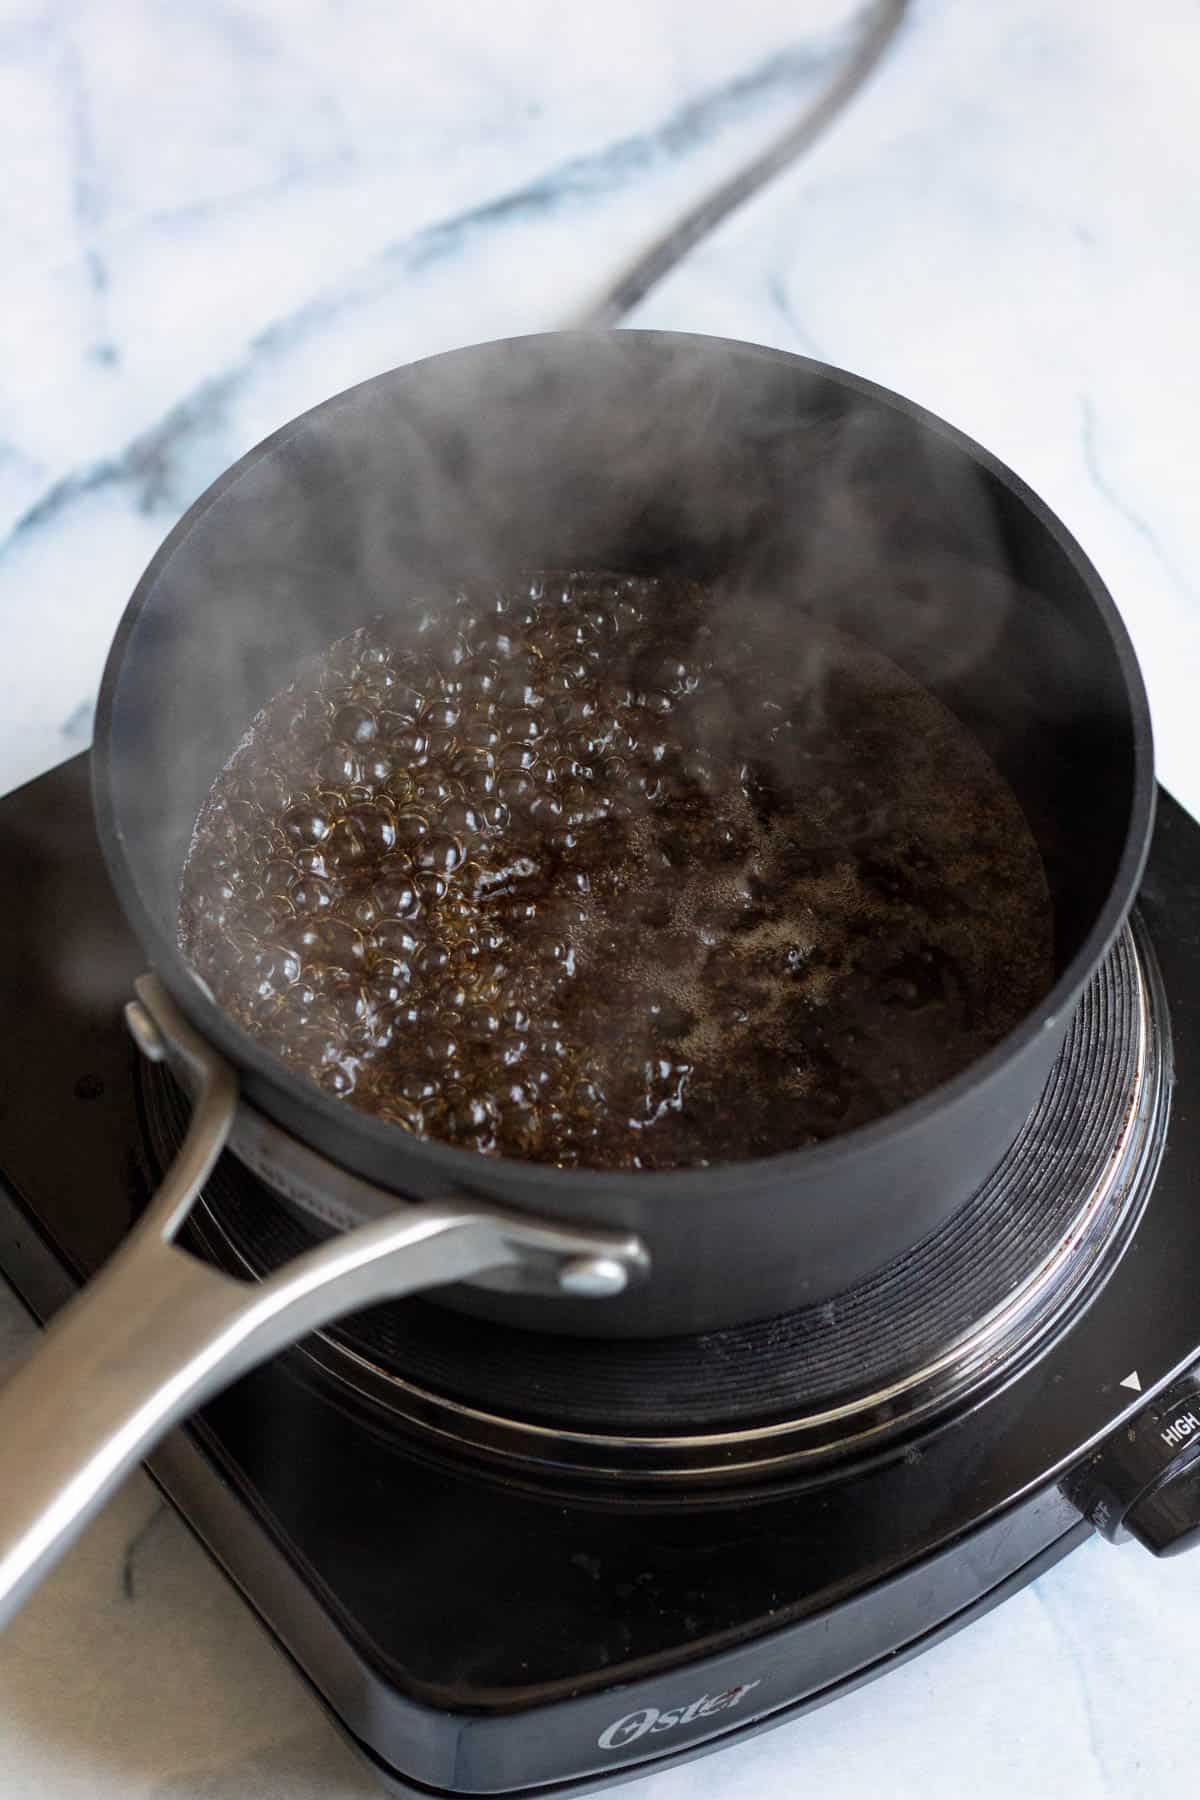 Tea leaves added to the boiling water in a saucepan. 